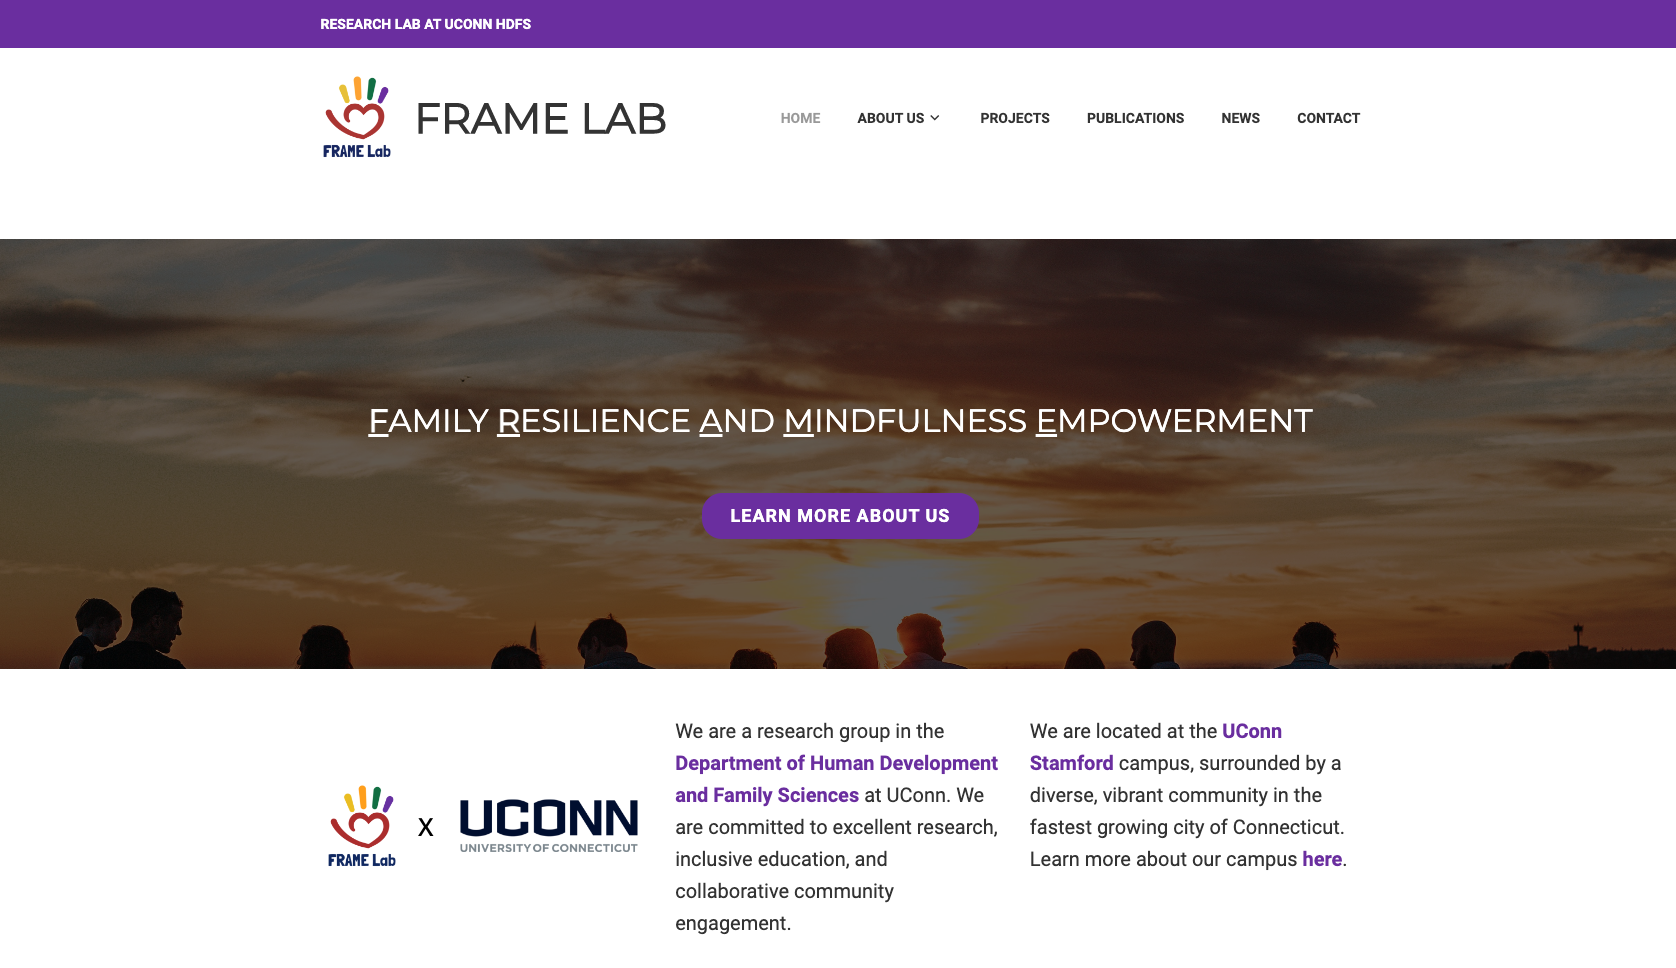 FRAME Lab home page